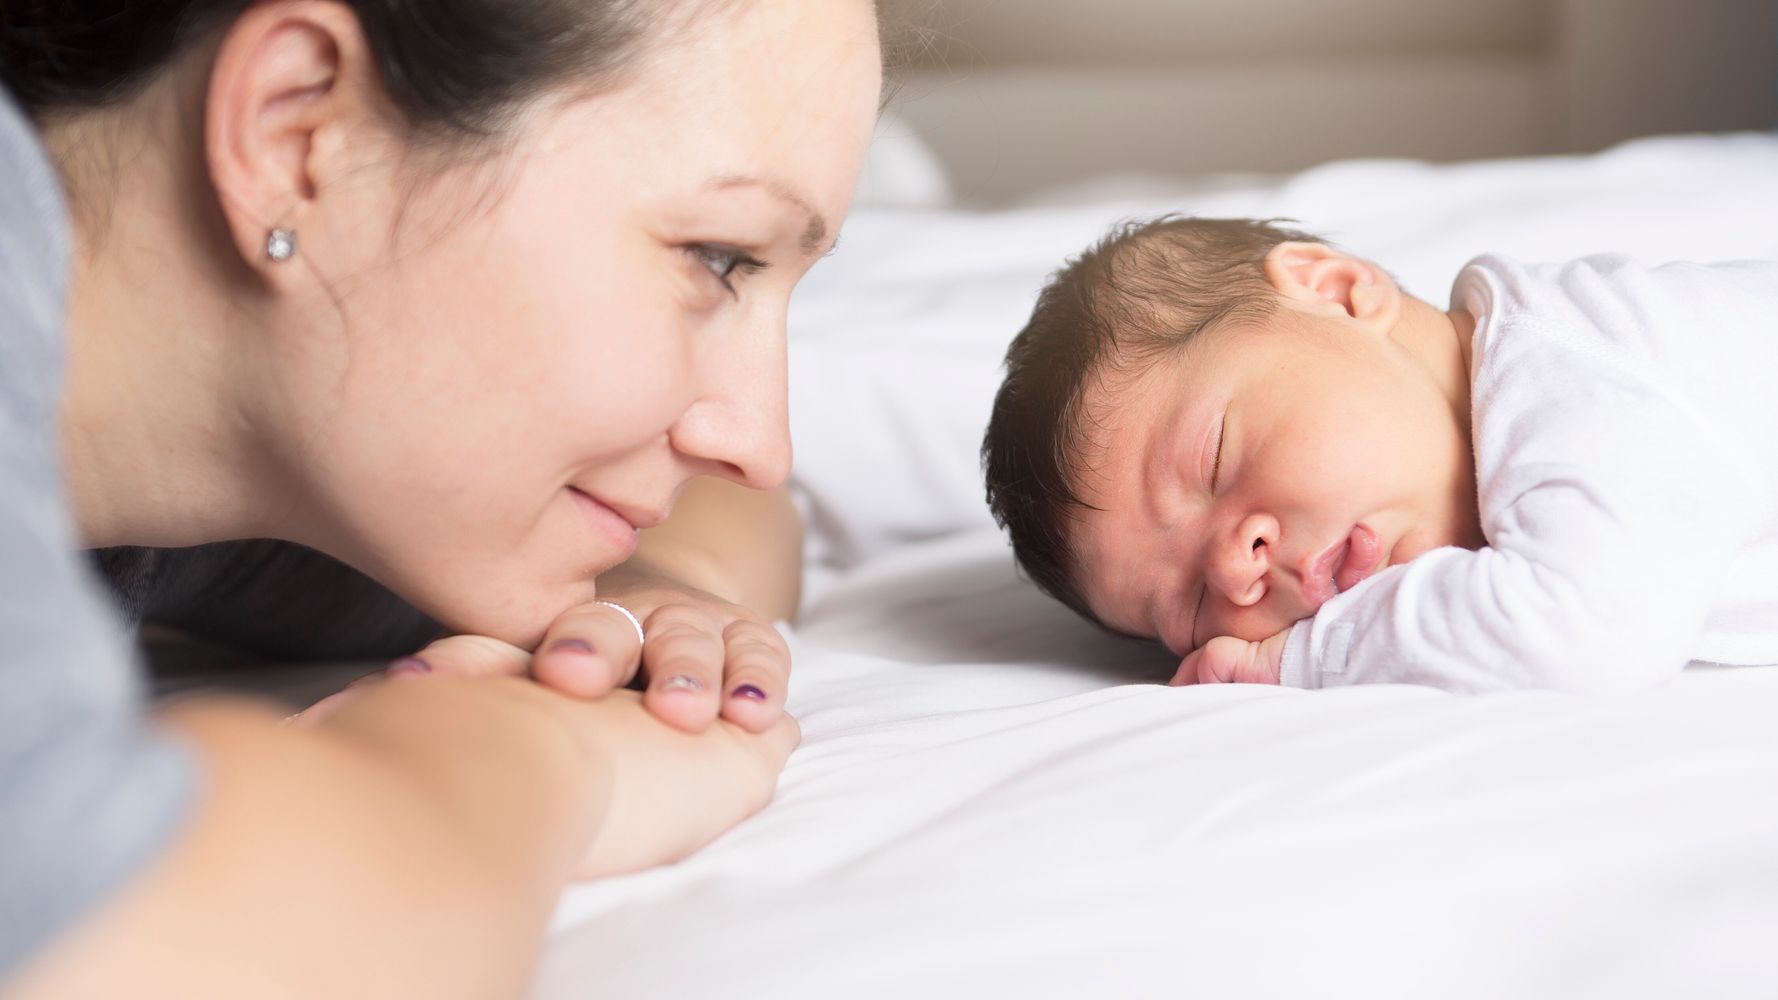 Theres A Perfectly Good Reason Plenty Of Moms Lick Their Newborns